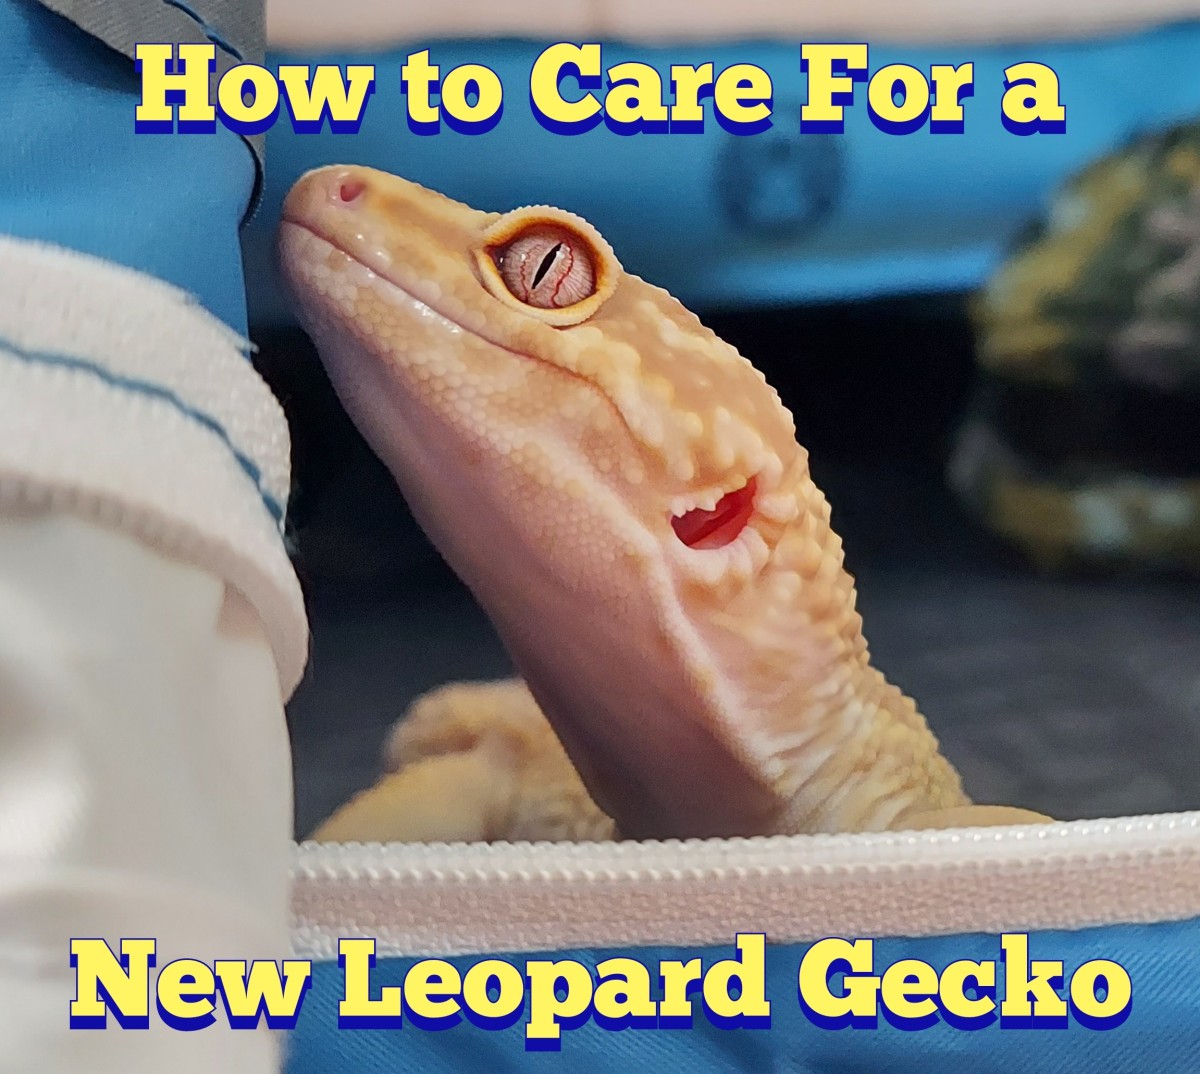 How to Care for a New Leopard Gecko